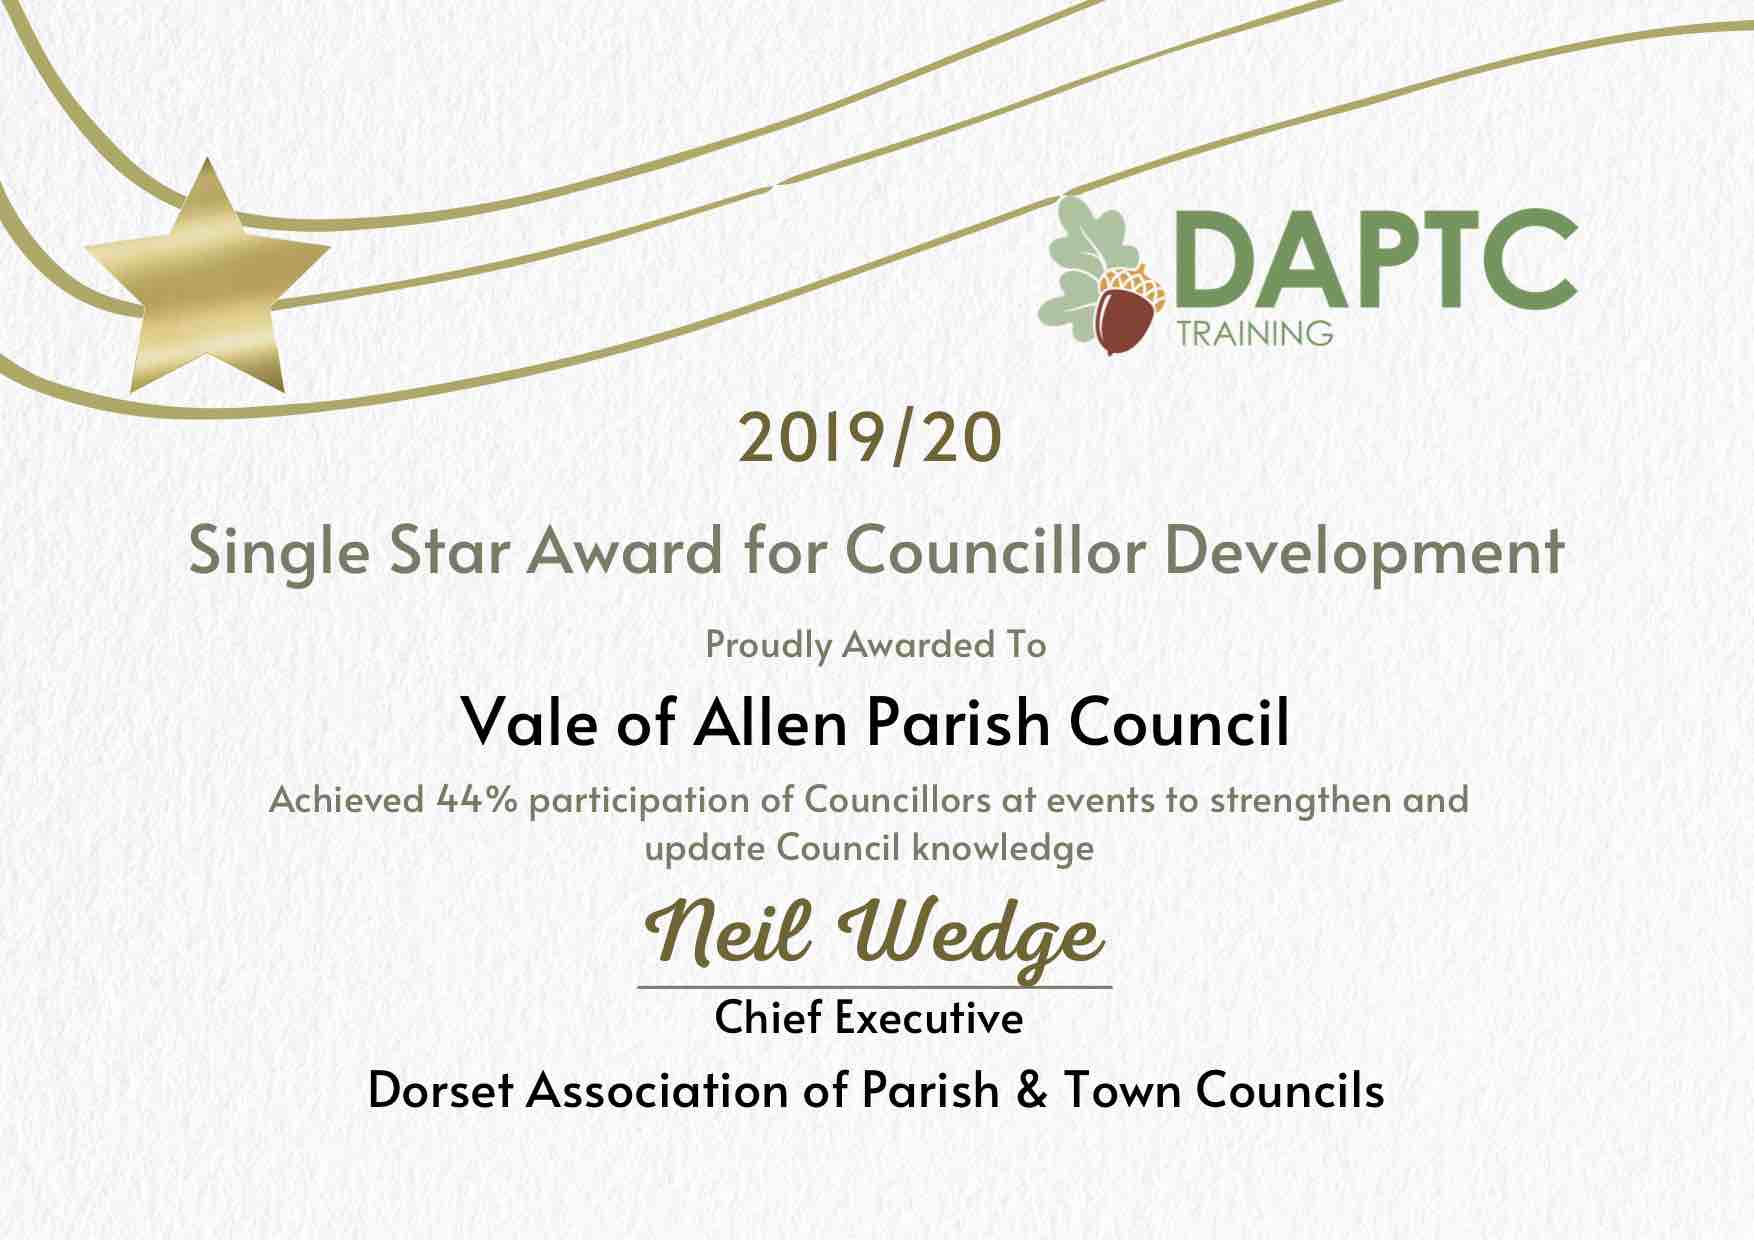 Image copy of certificate showing "Single Star Aware for Councillor Development"